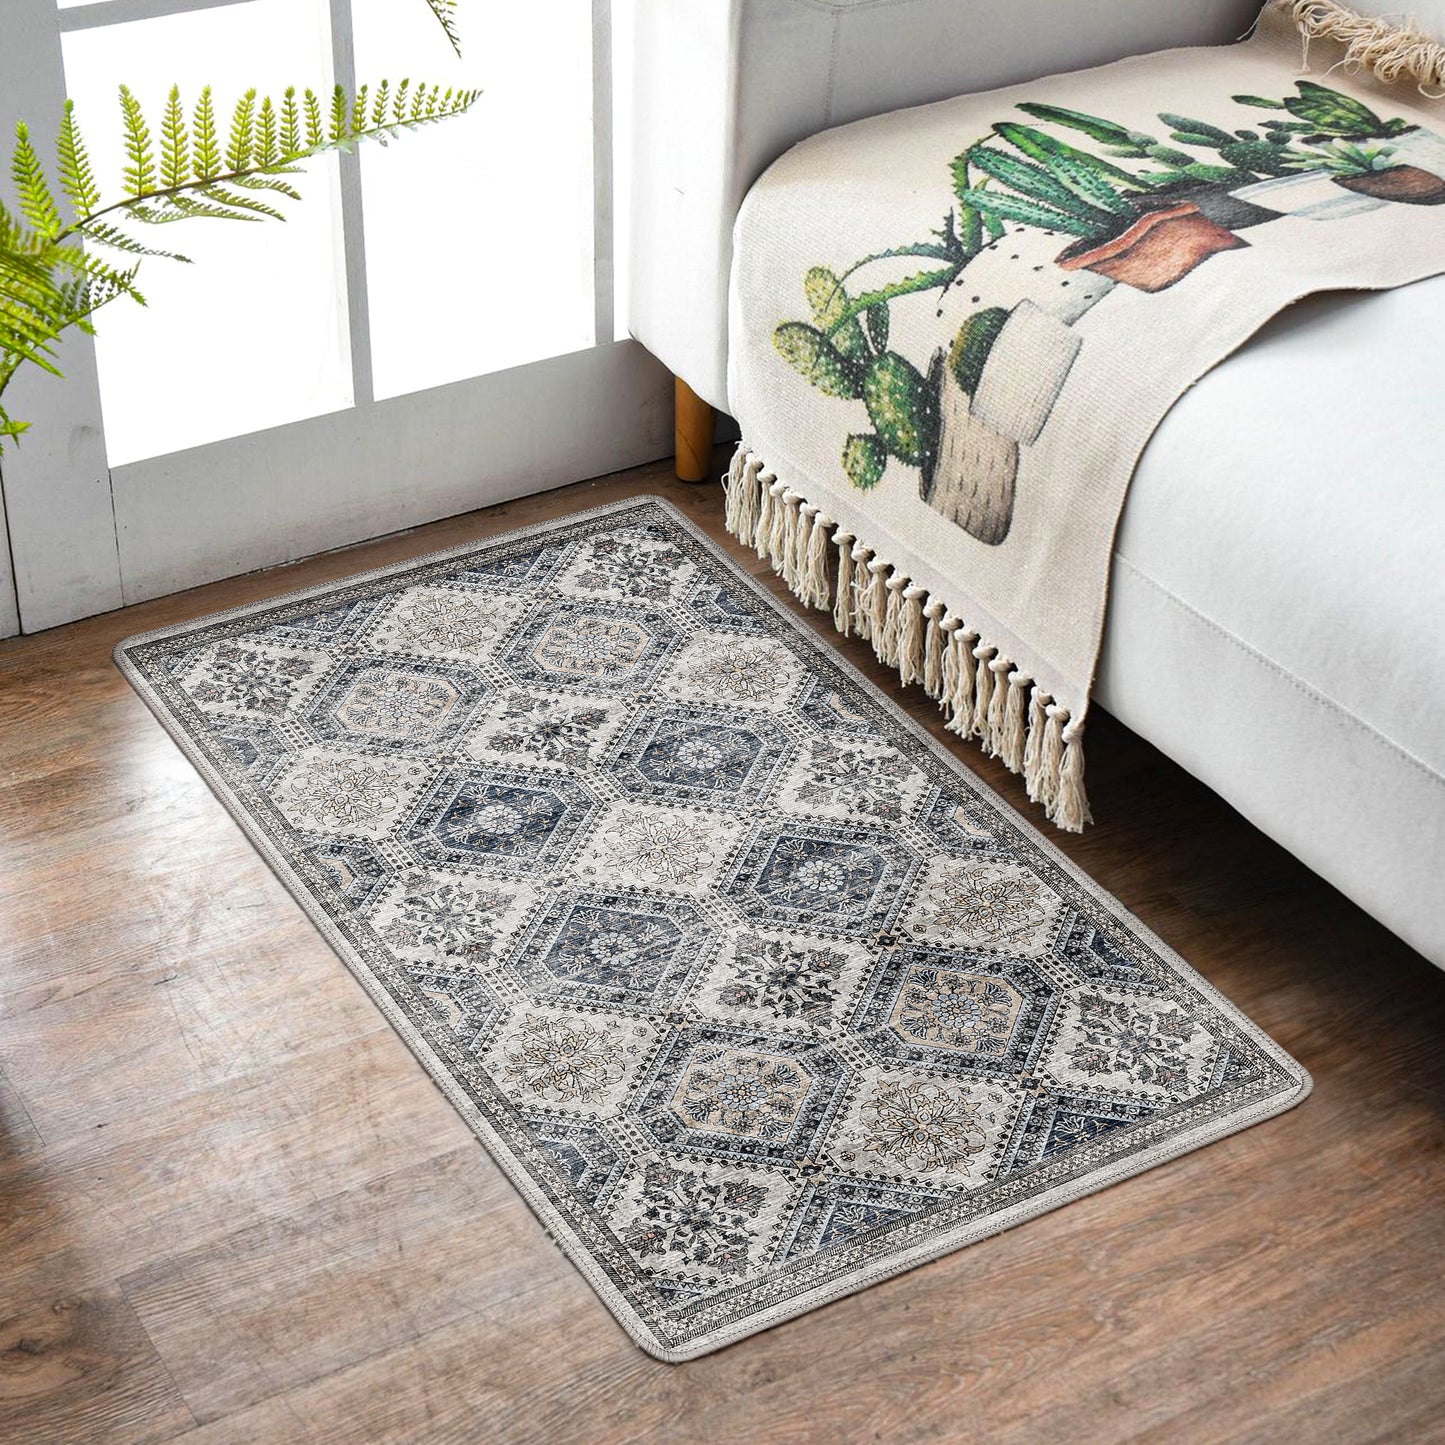 GENIMO Area Rugs, Non Slip Machine Washable Indoor Rug, Low Pile Chenille Print Mat for Entrance, Bedroom, Hallway, Living room Kitchen and Bathroom